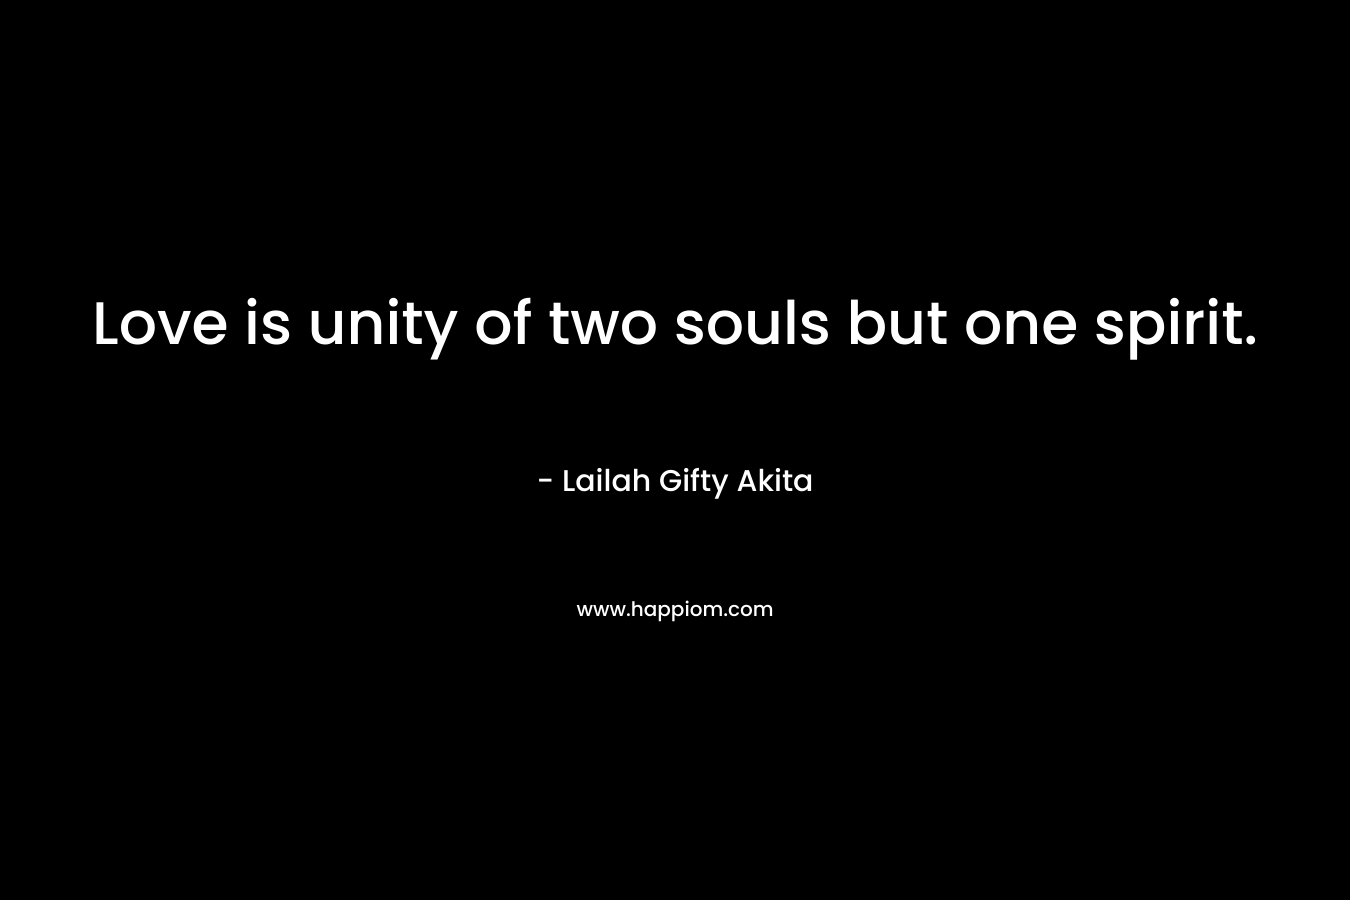 Love is unity of two souls but one spirit.